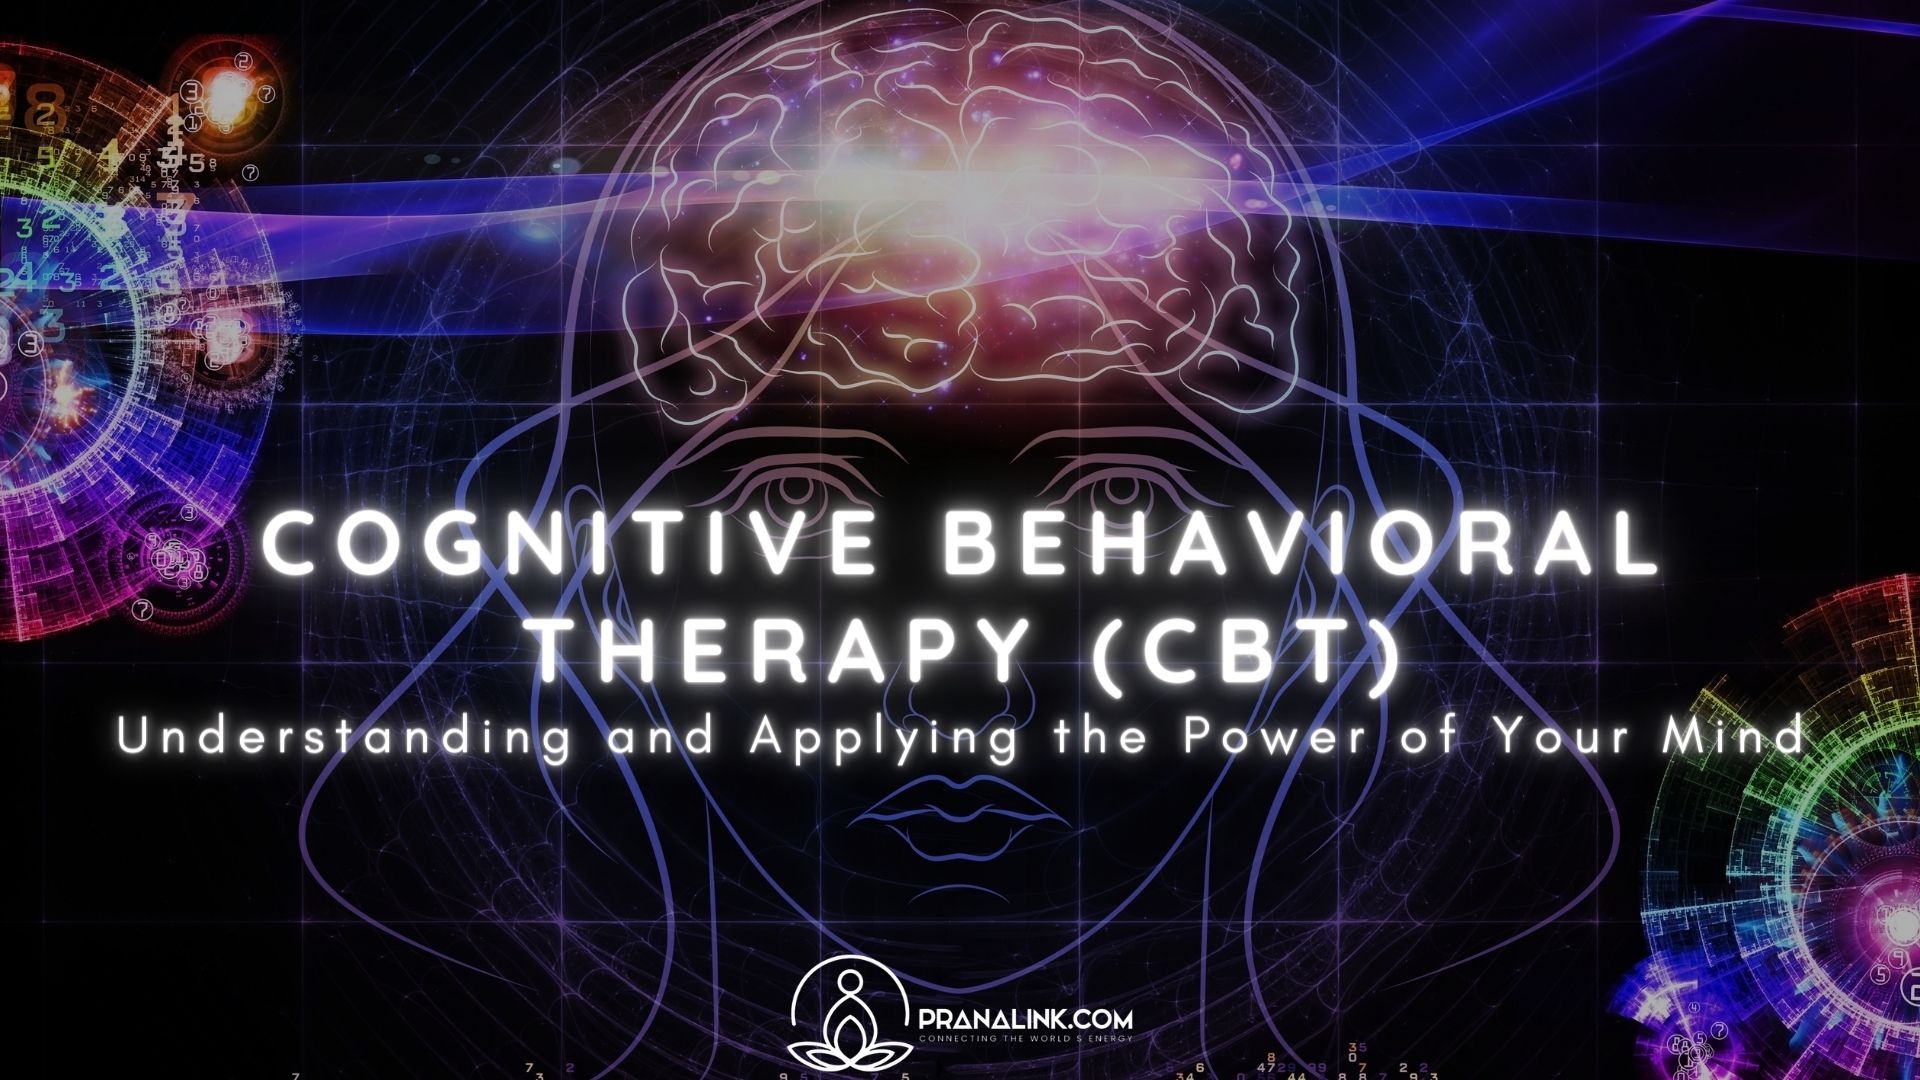 Cognitive Behavioral Therapy